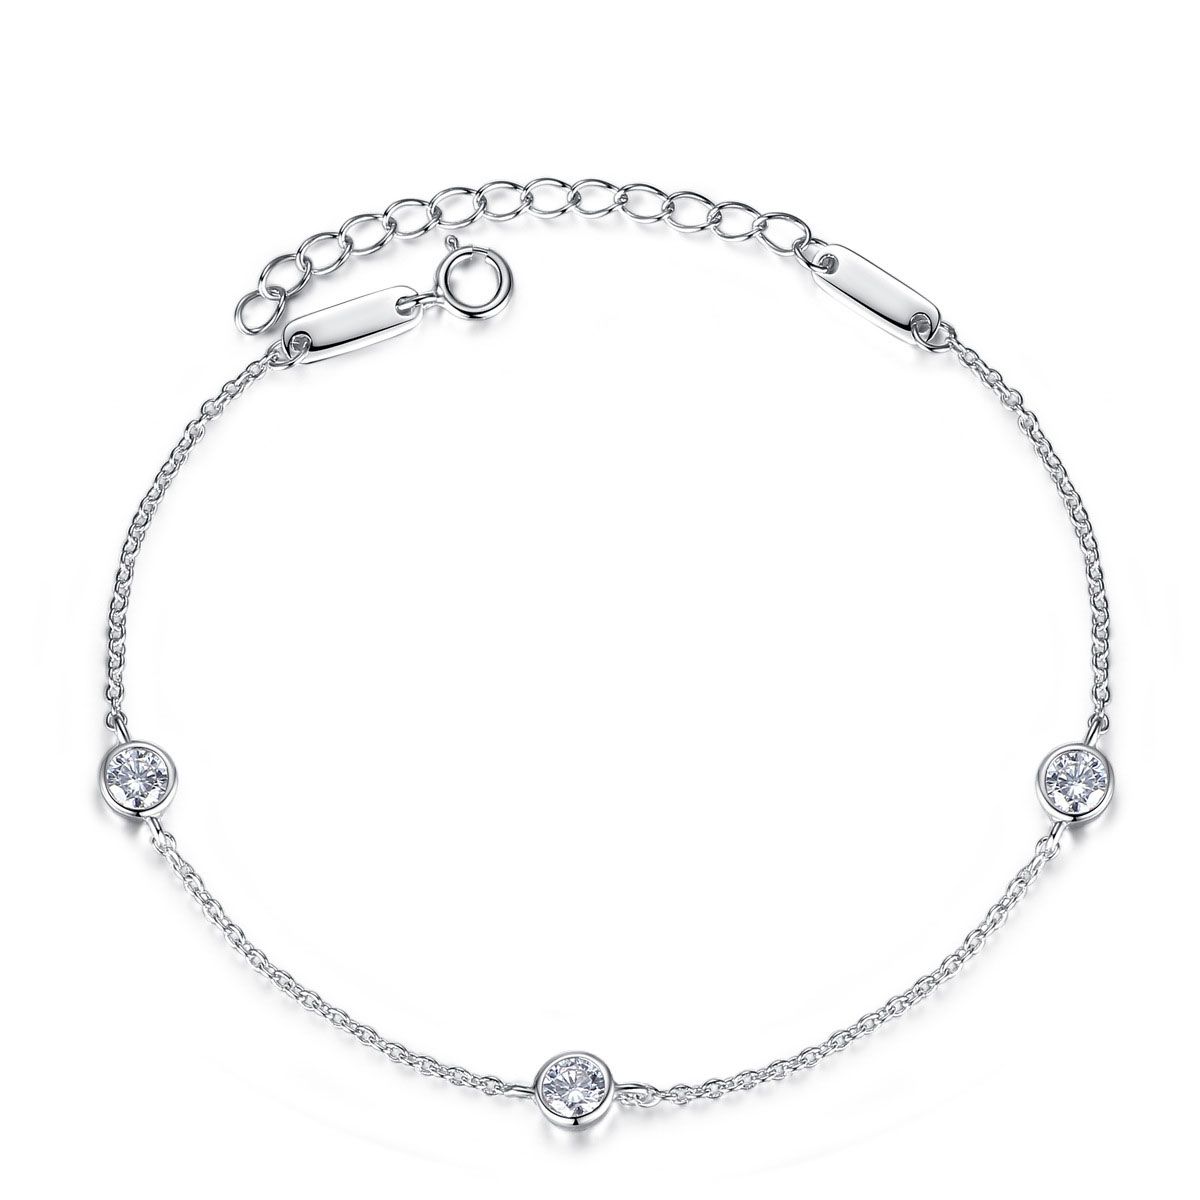 Aria Dainty Beaded Bracelet - Silver & 9ct Gold Filled - Tomm Jewellery UK